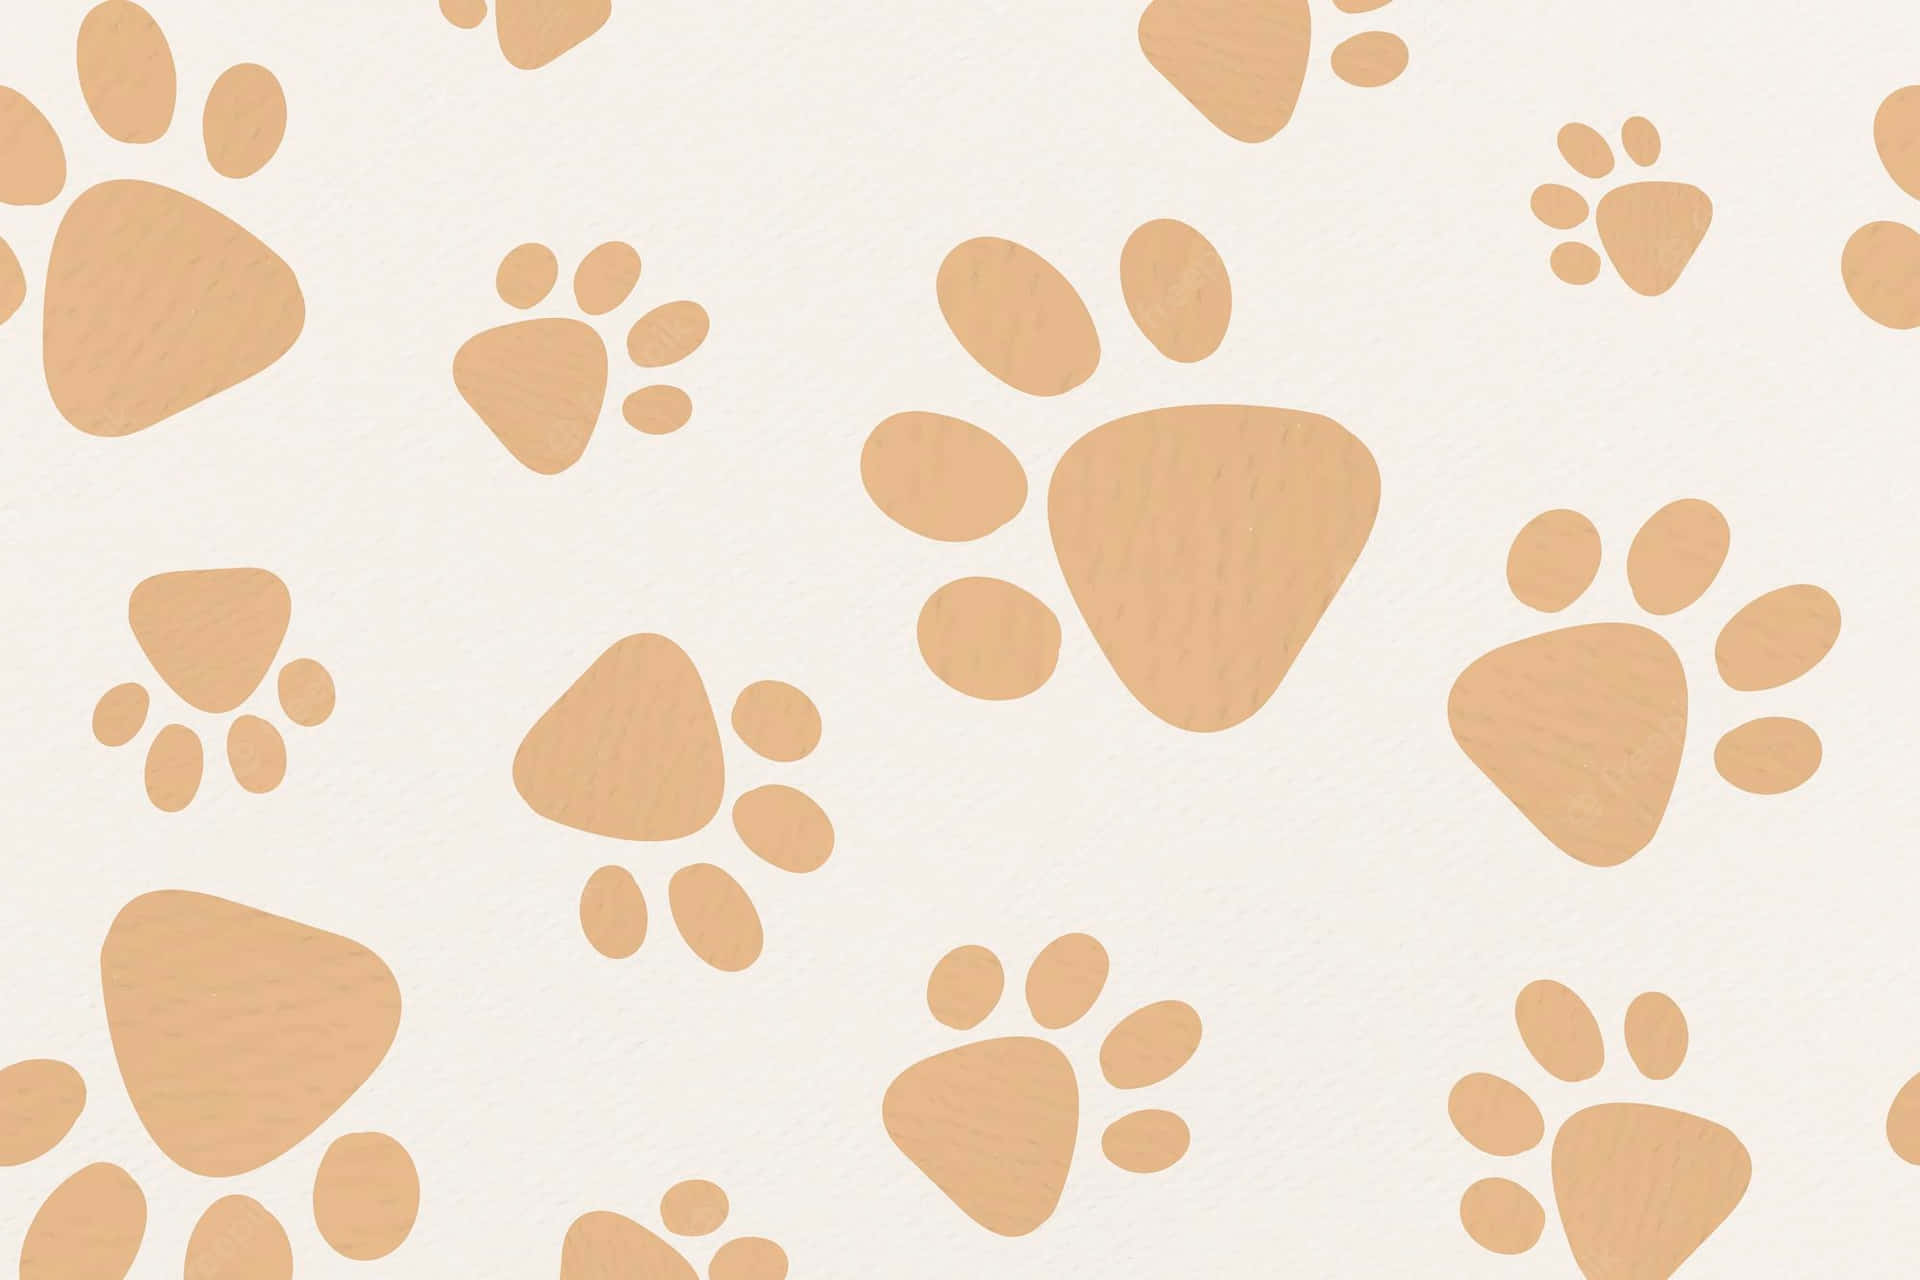 Show off your pet pride with a paw print